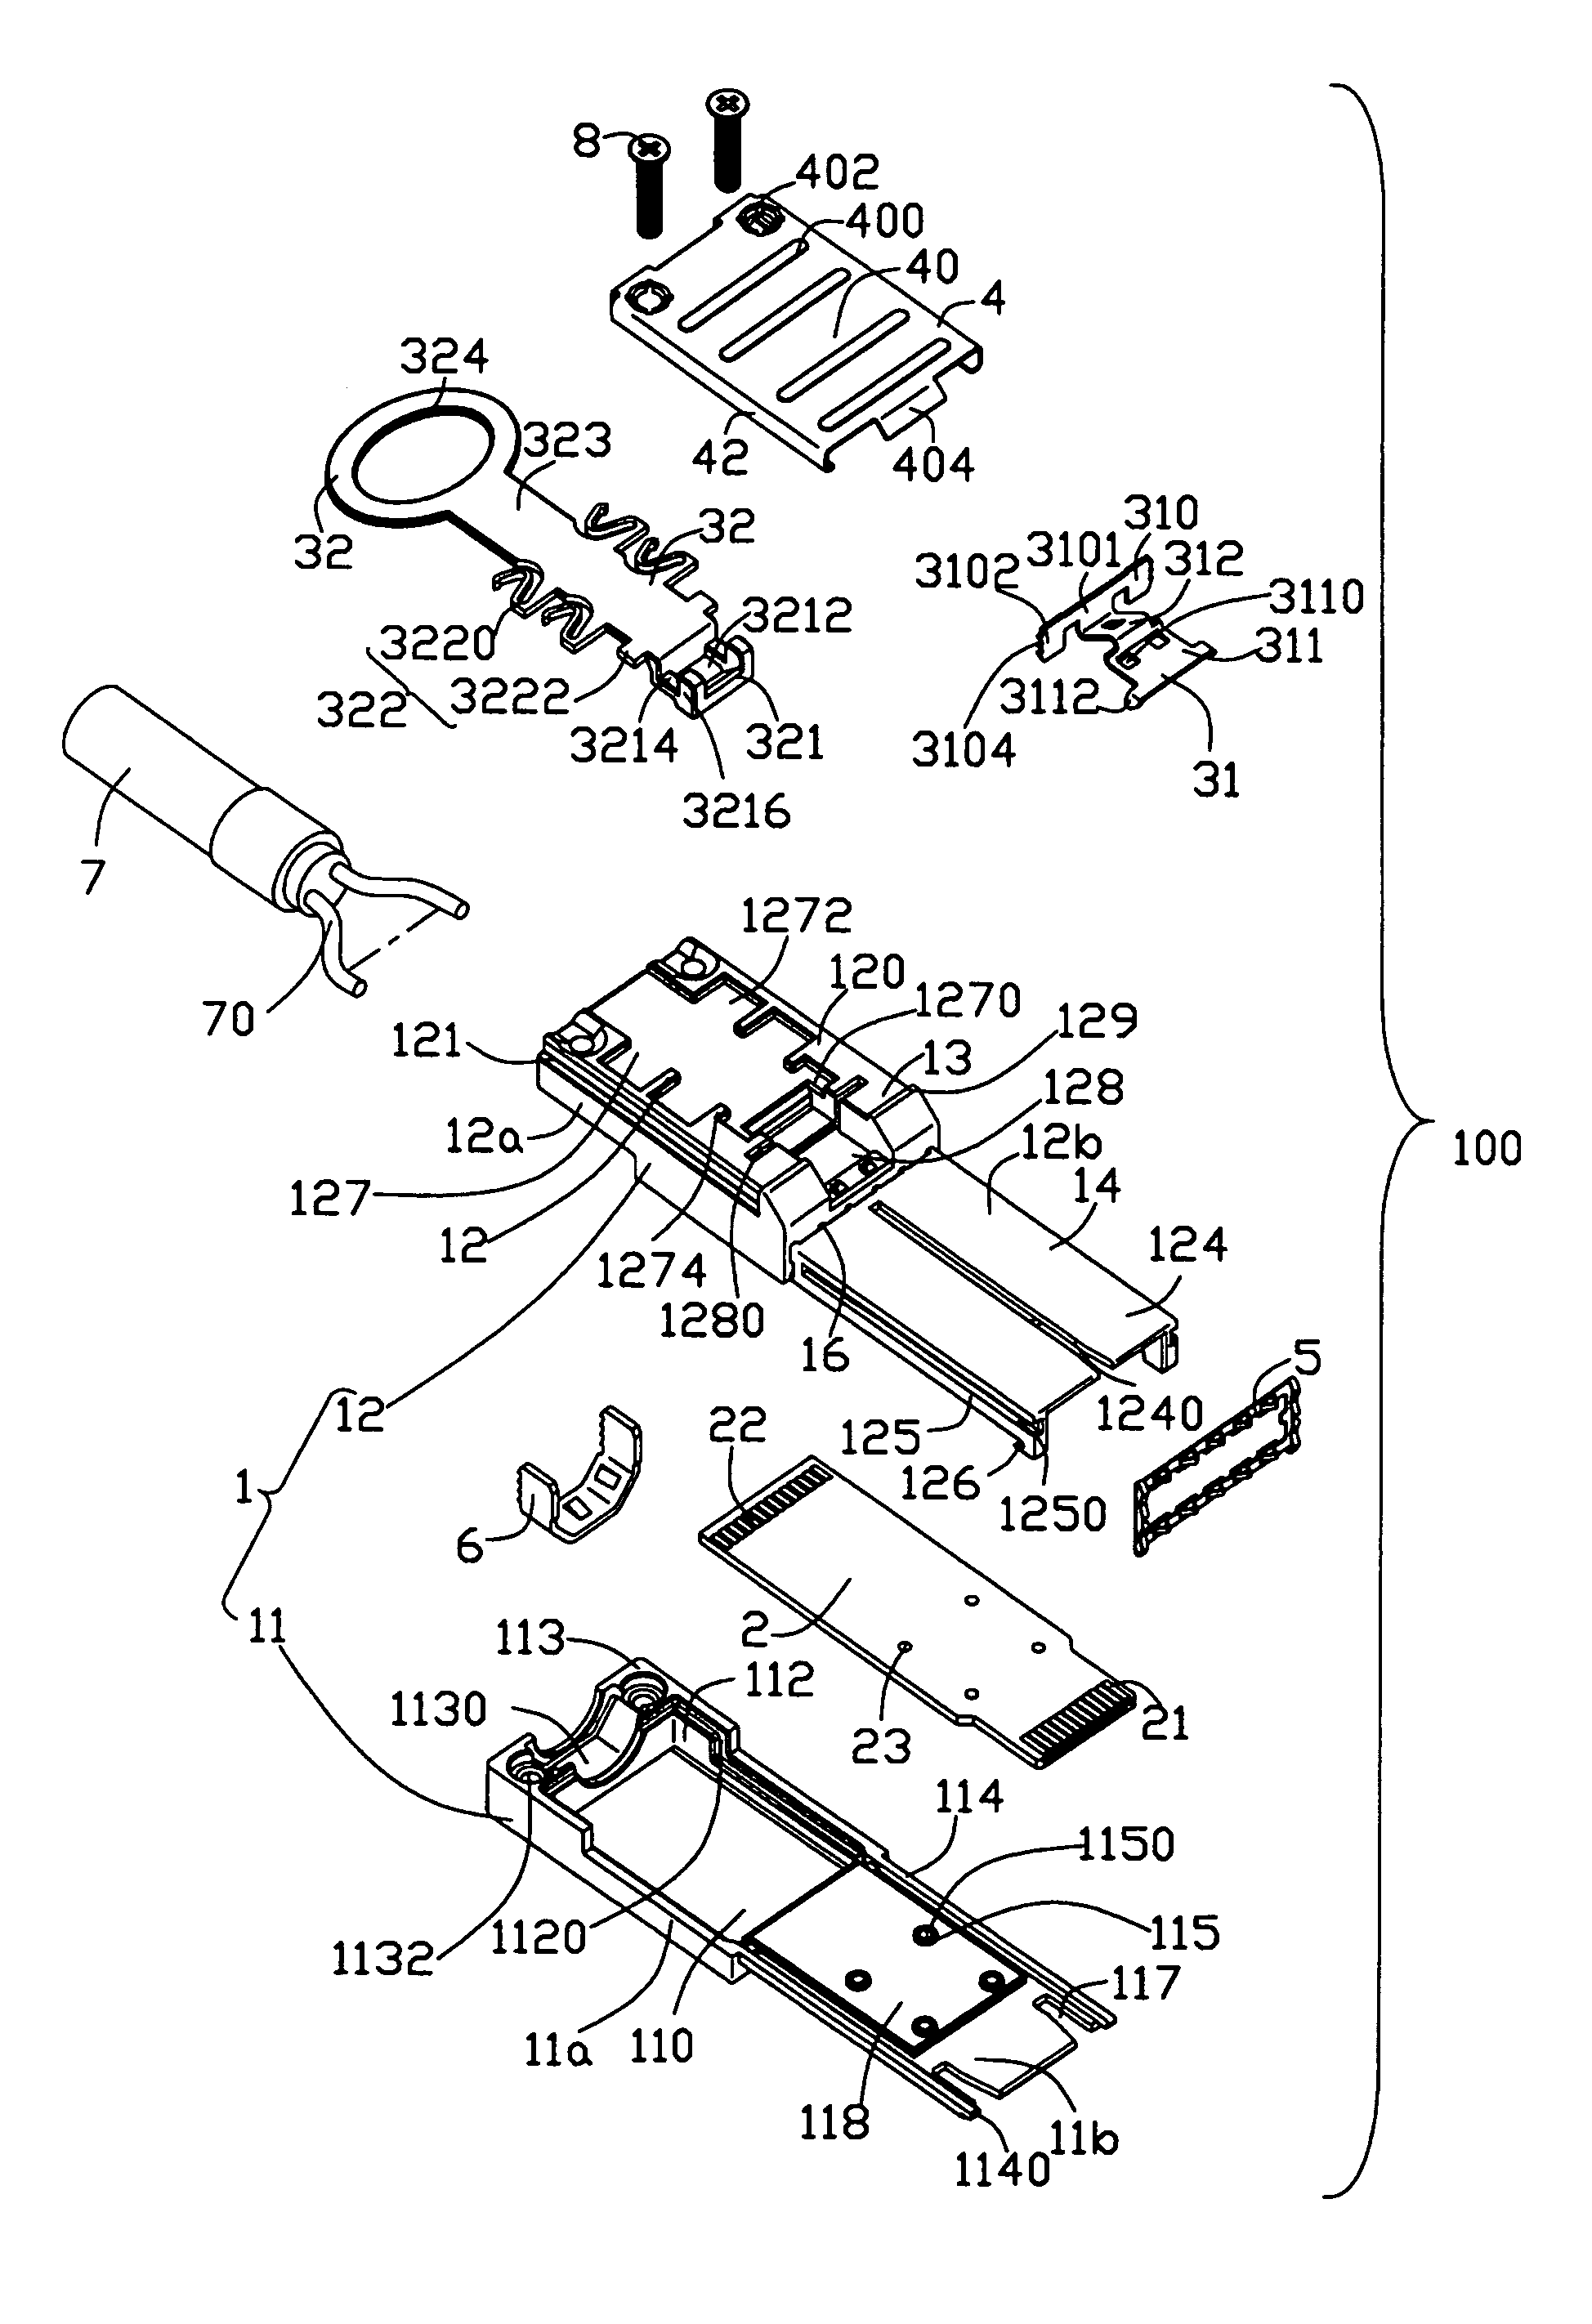 Cable connector assembly with latching mechanism